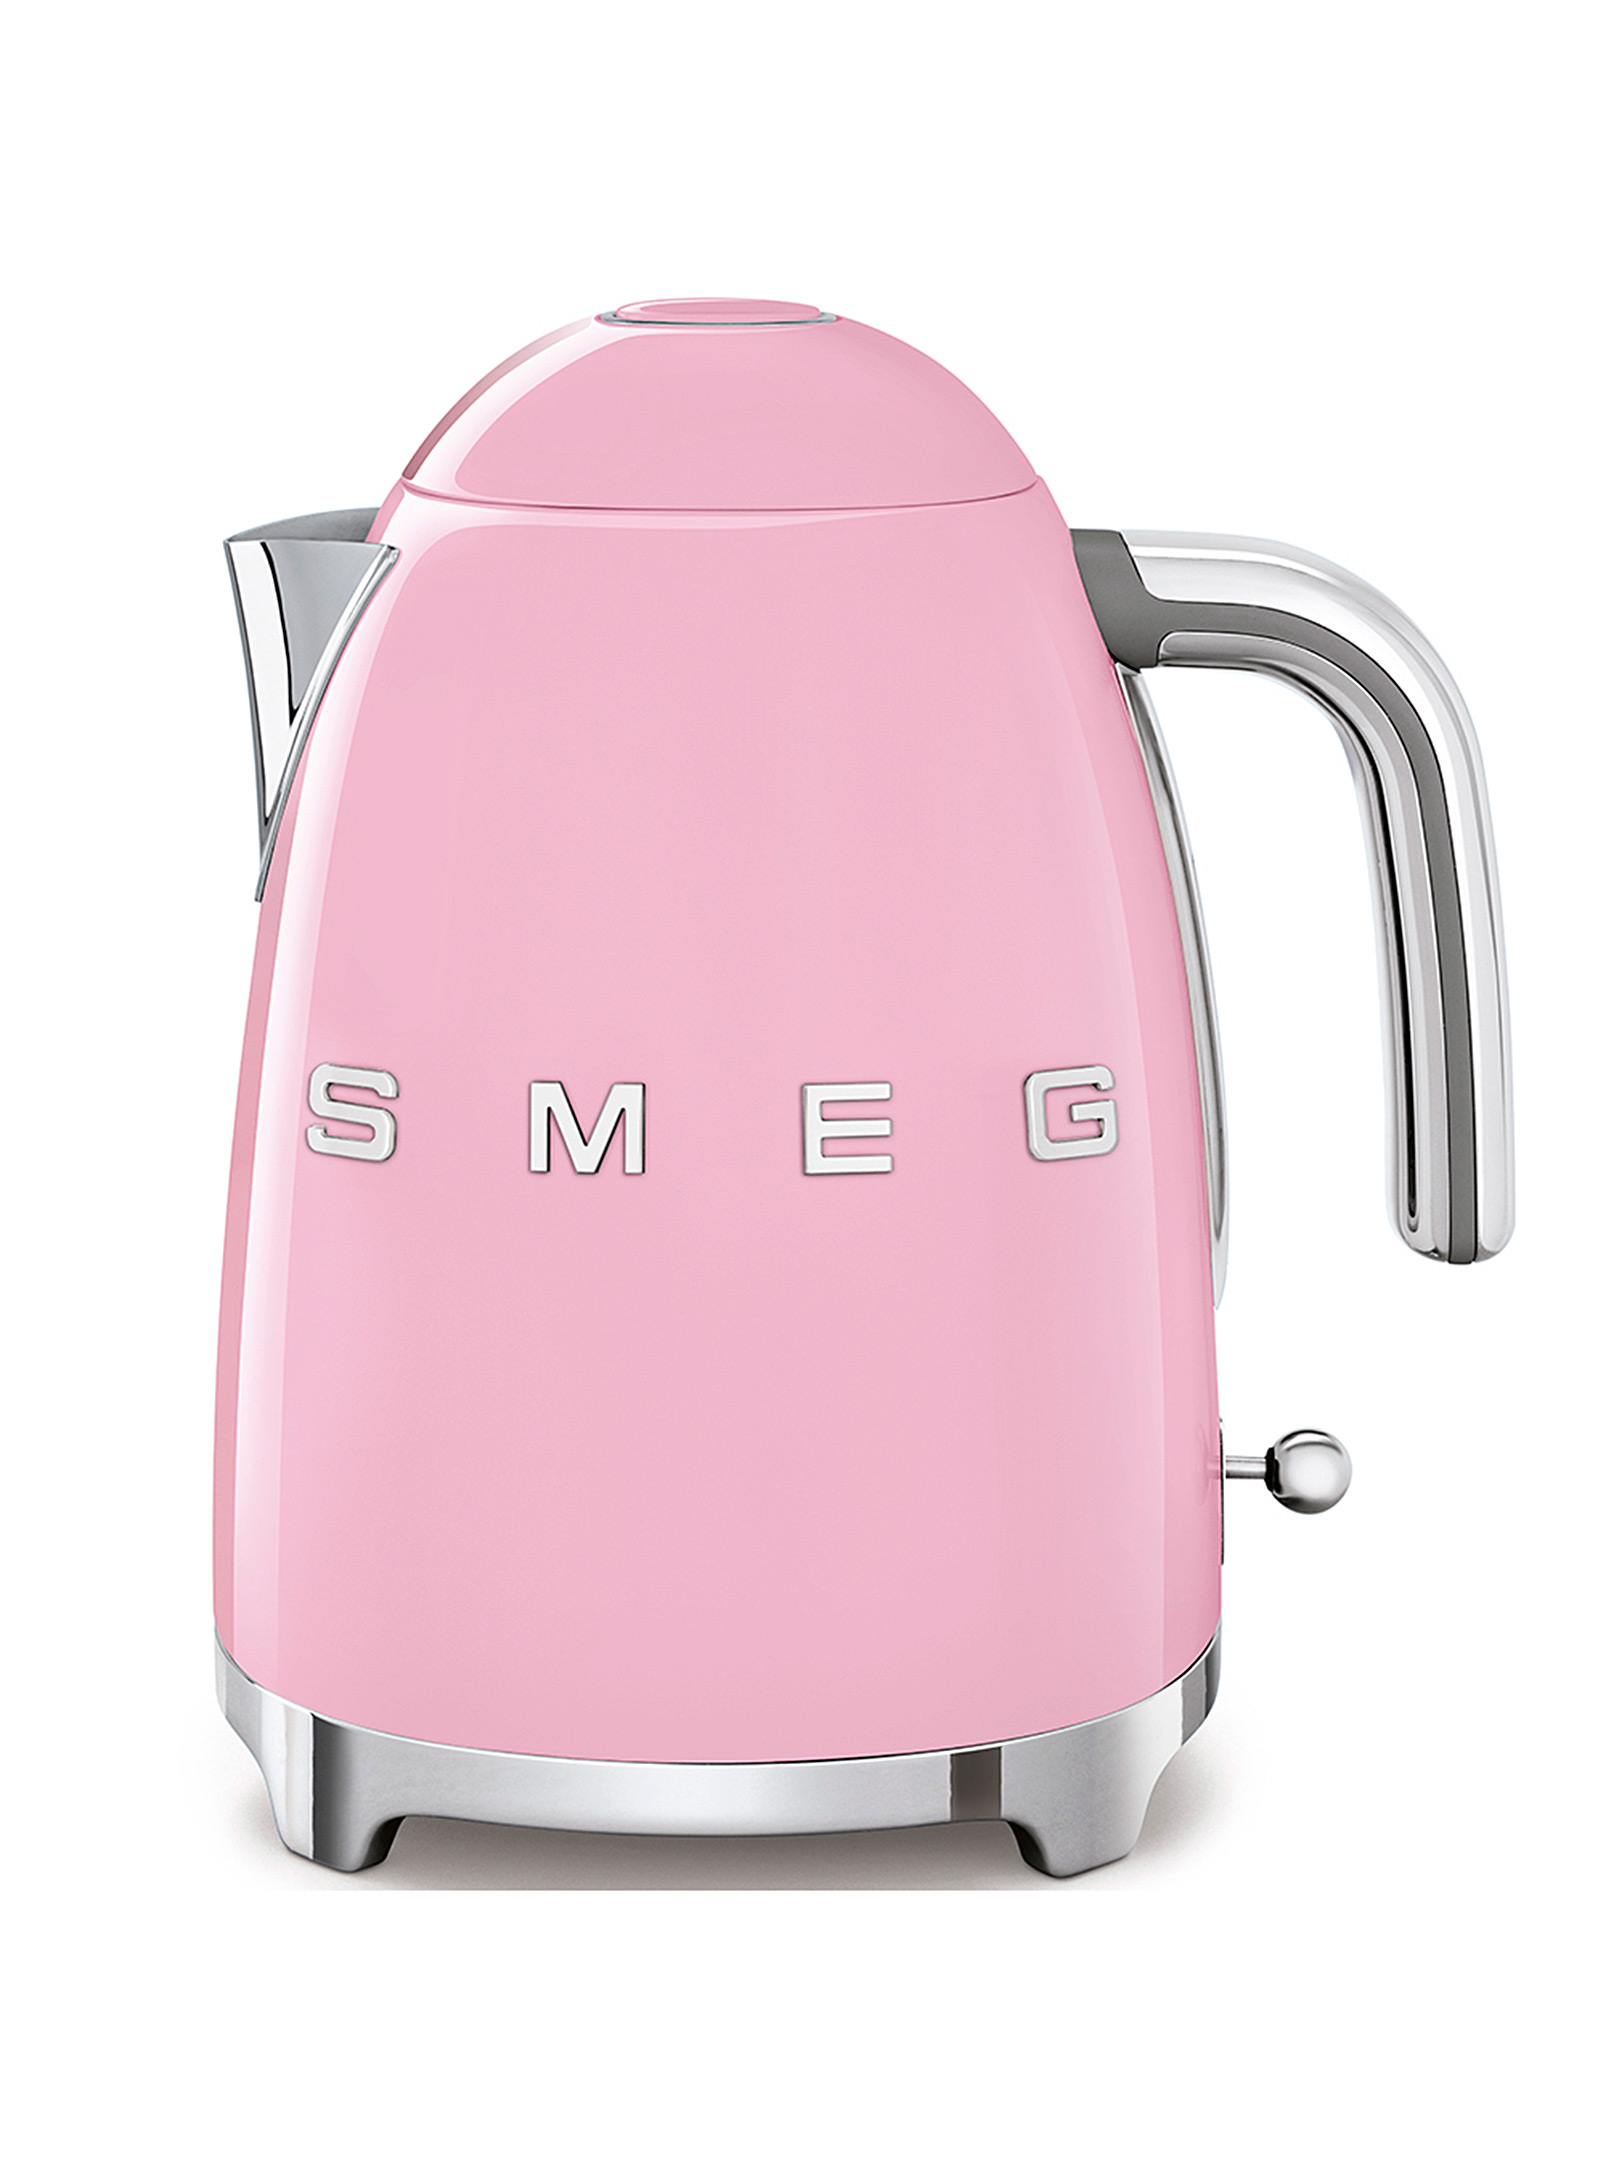 Smeg Retro Electric Kettle In Pink